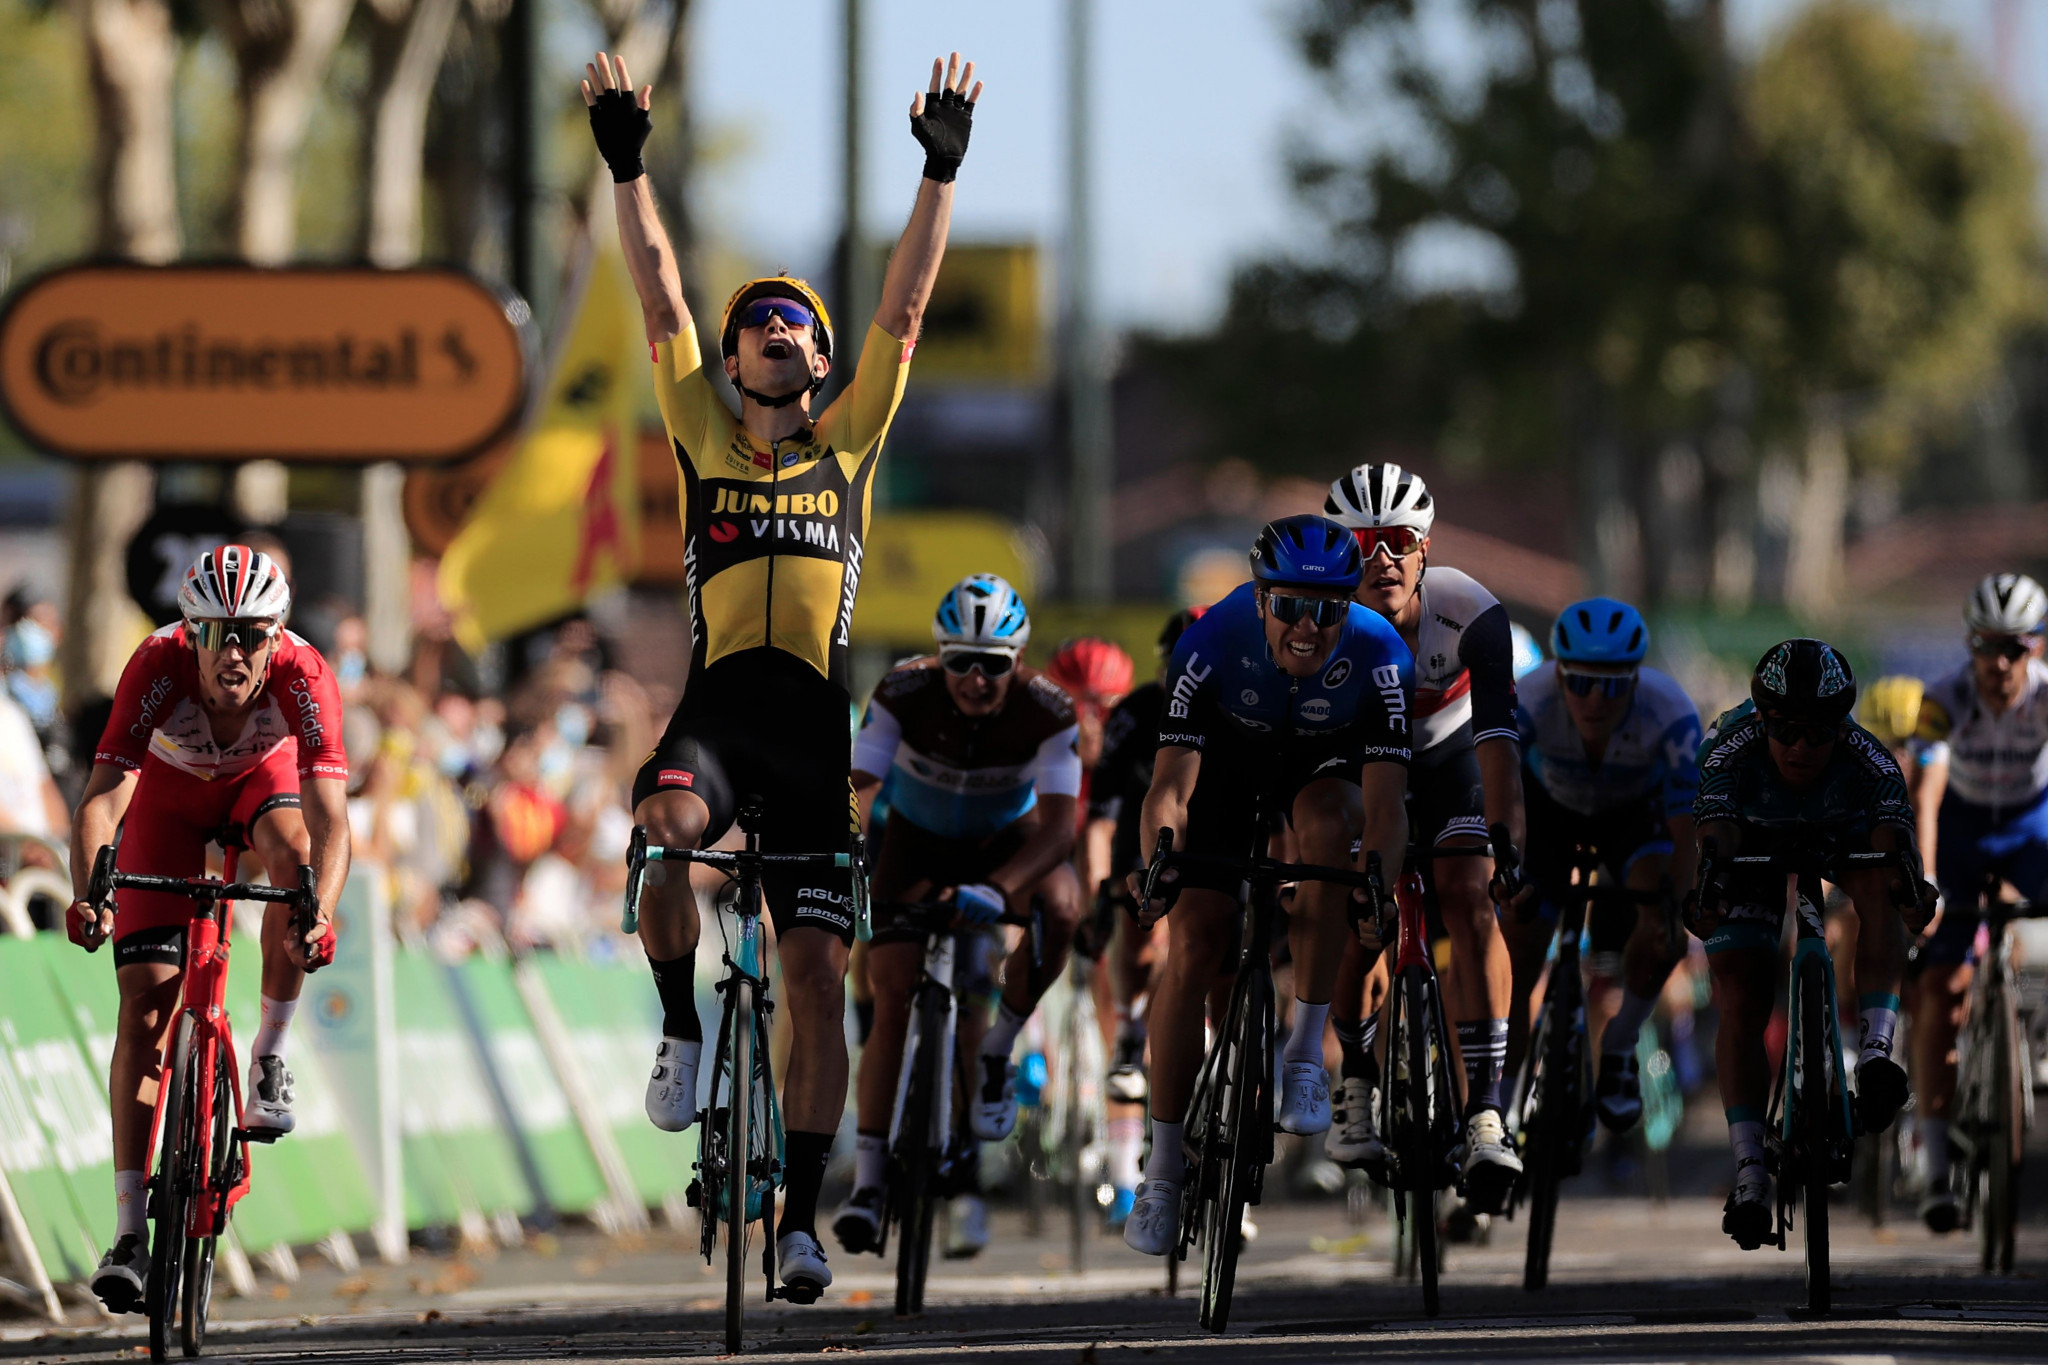 Van Aert clinches second stage win as Pogačar loses time at Tour de France